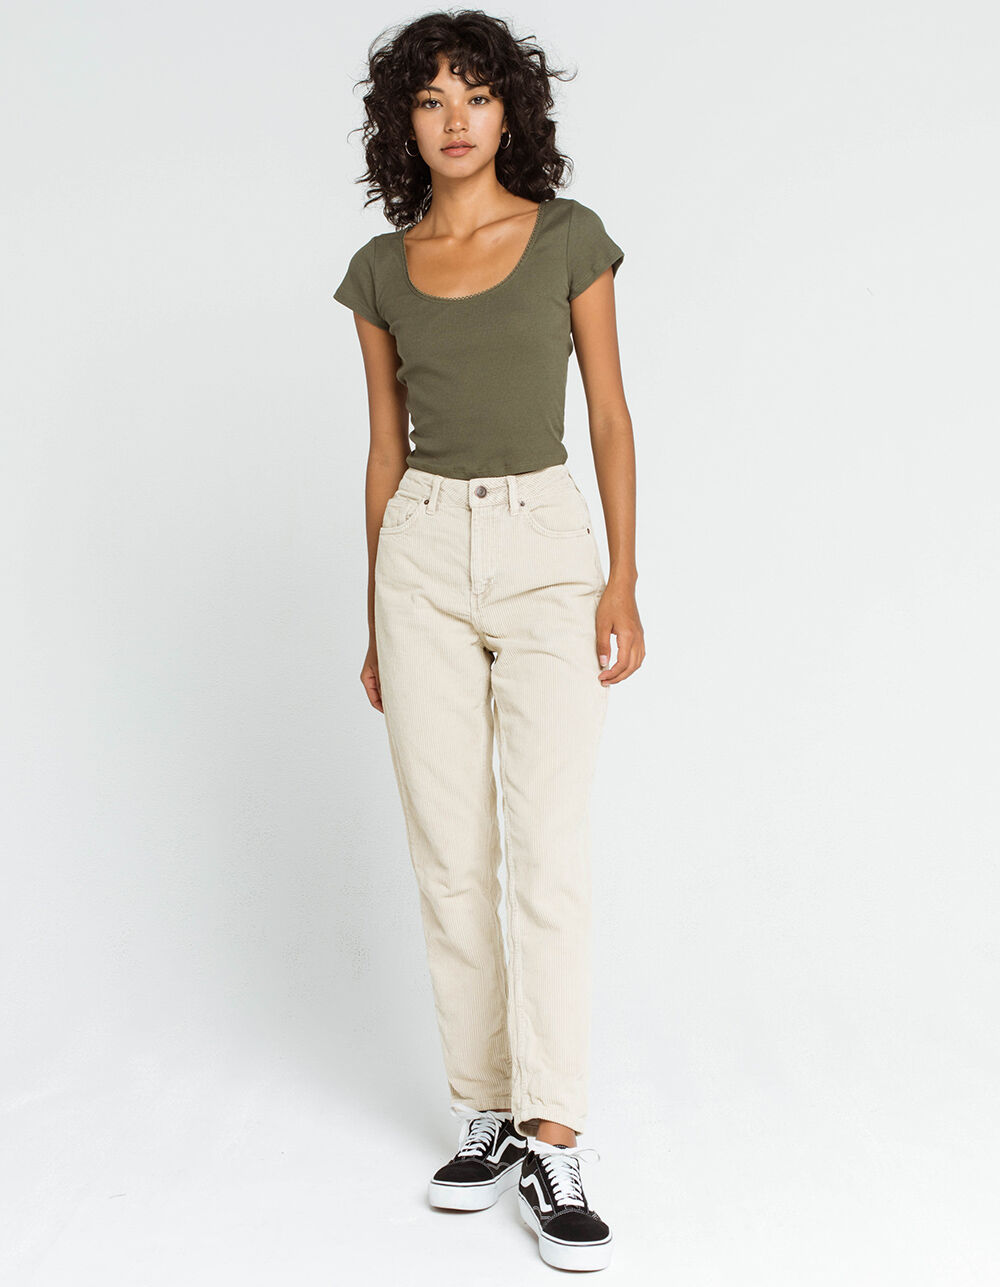 BOZZOLO Picot Trim Womens Olive Tee - OLIVE | Tillys